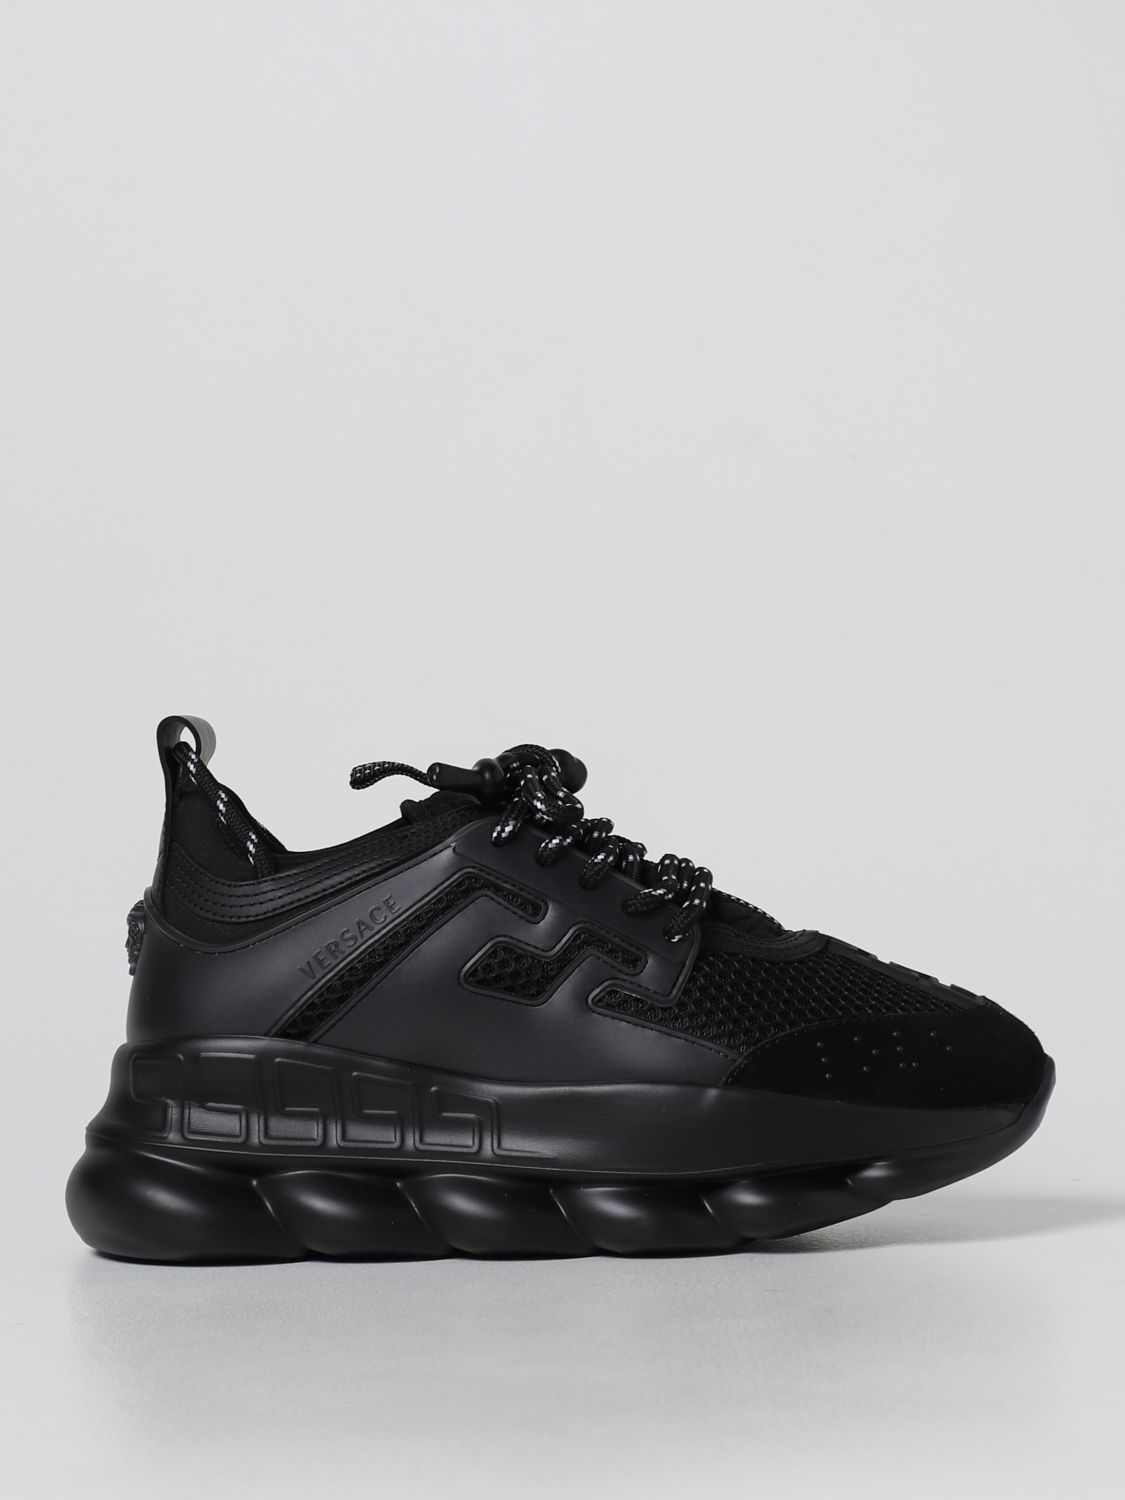 VERSACE: Chain Reaction mesh and leather sneakers - Black | Versace ...